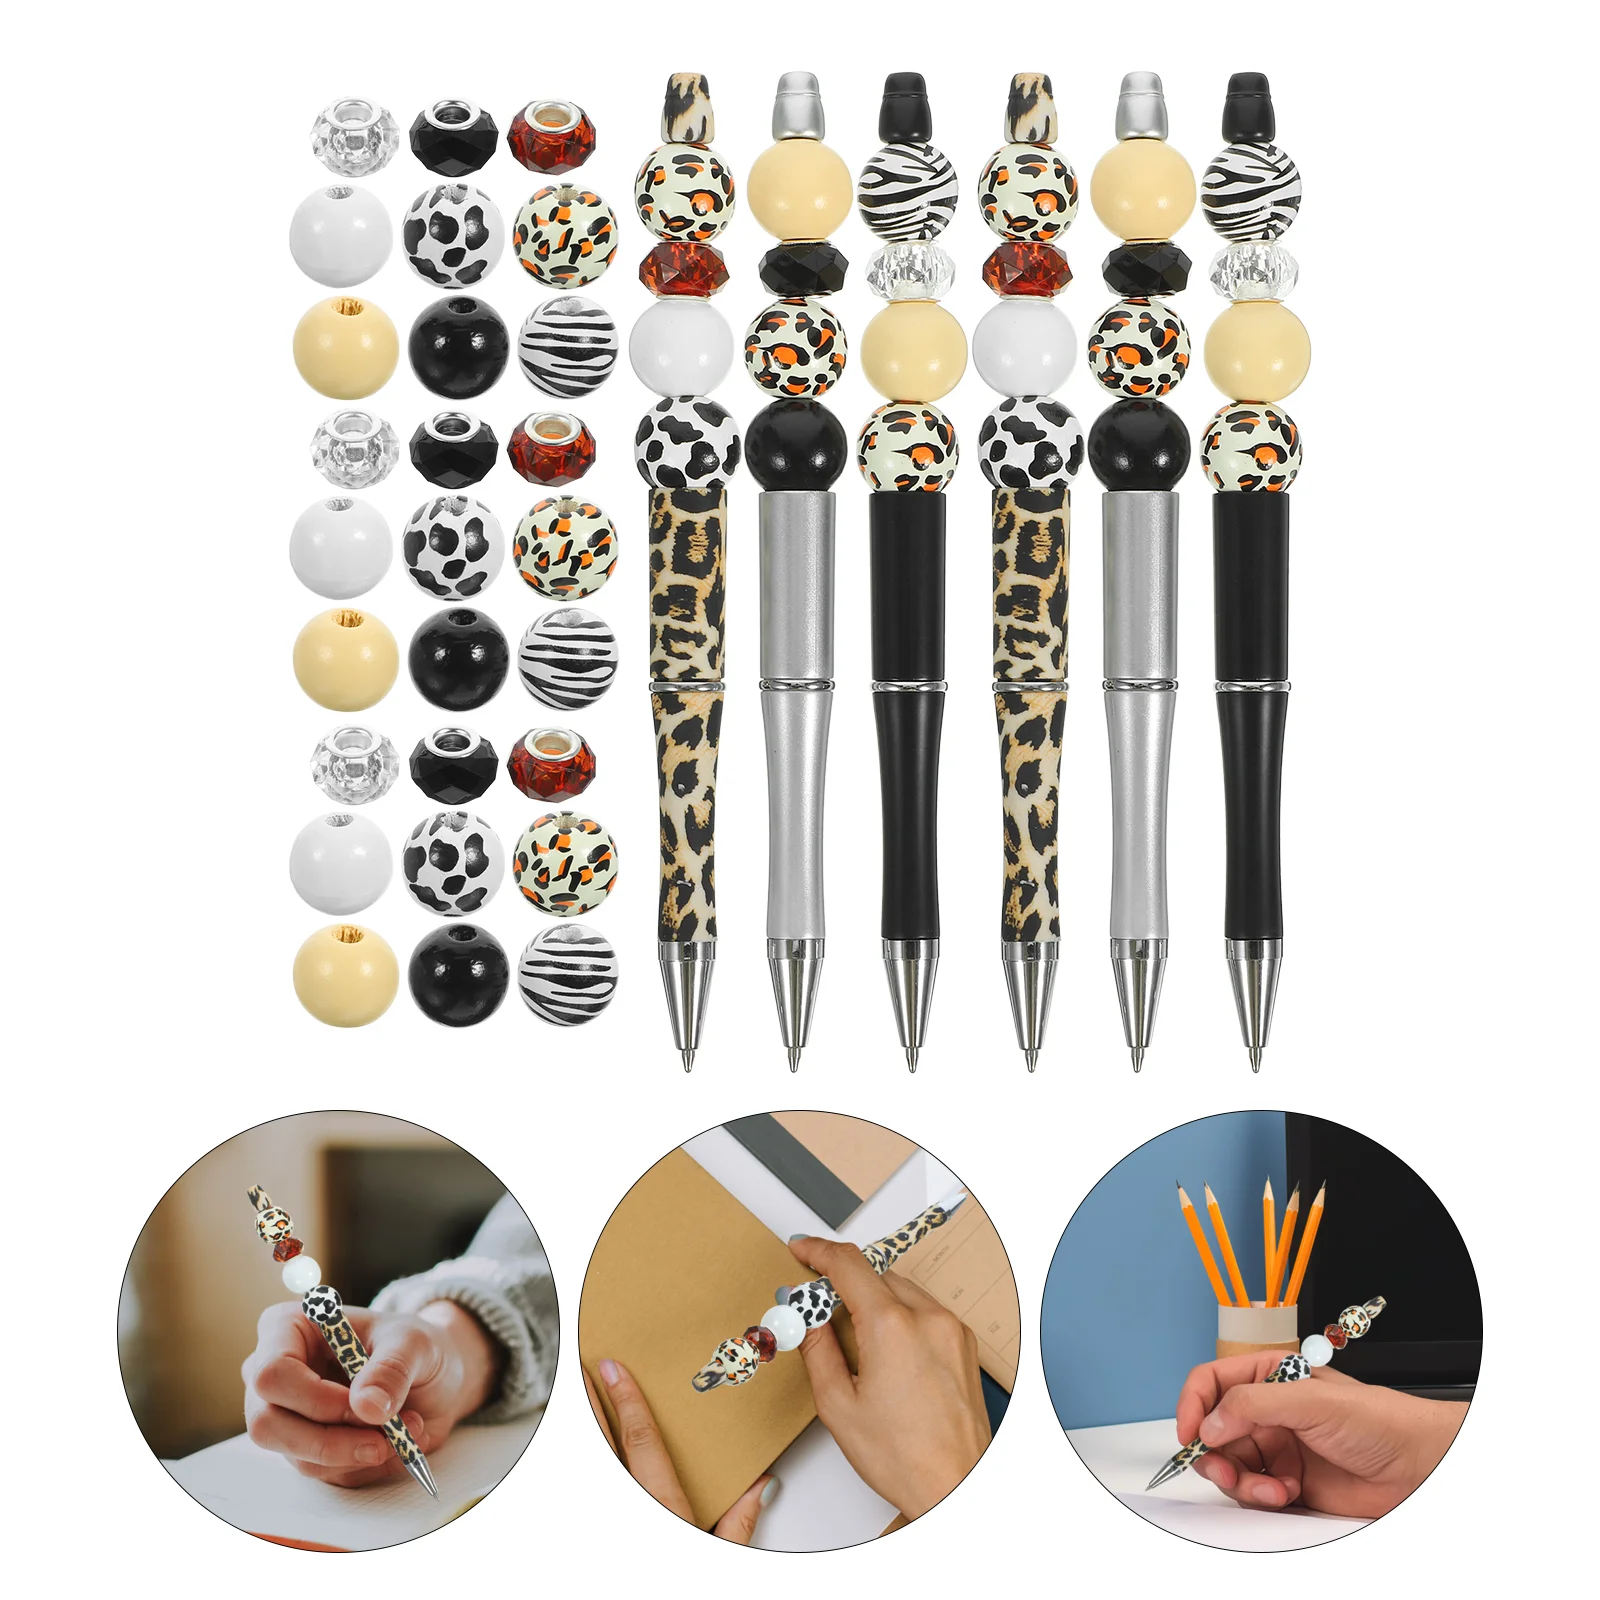 12 Pcs Plastic Pens Beaded Craft Plastic Beadable Kit Bulk Adult Accessory with Beads Silicone Portable